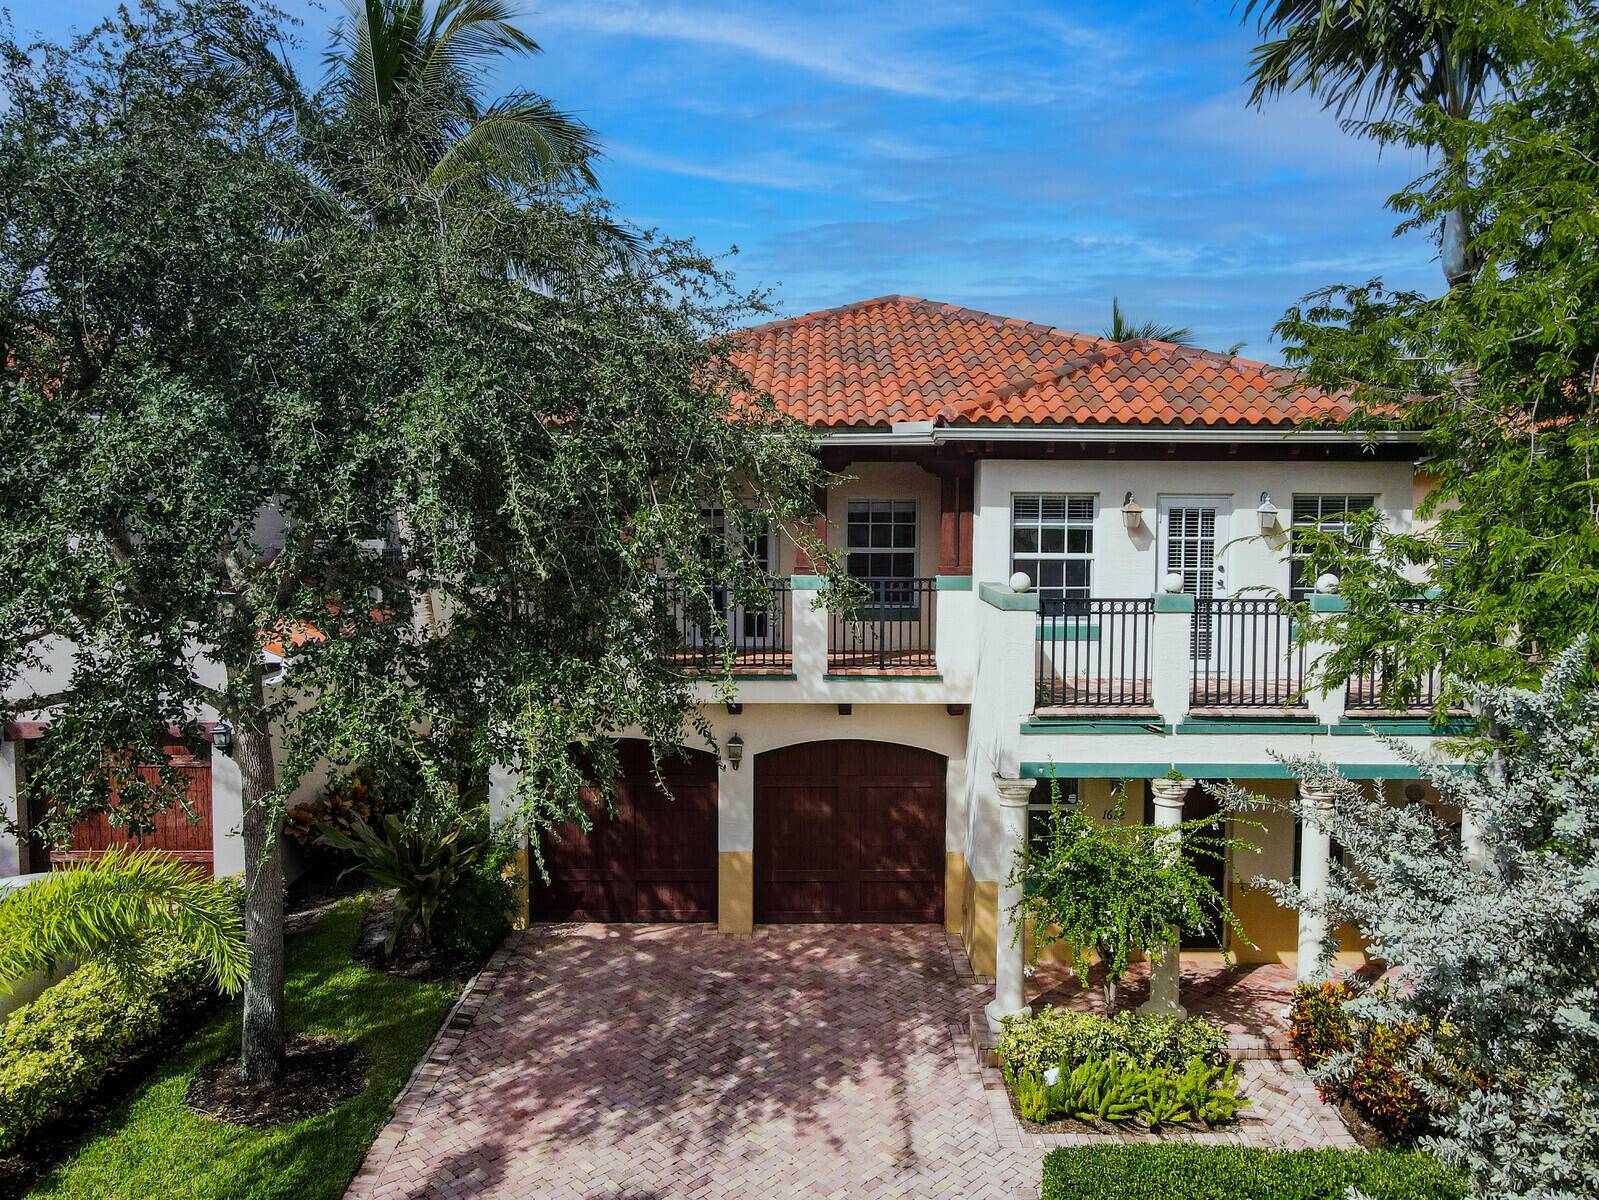 Old world Mediterranean charm within minutes of vibrant downtown Delray Beach !